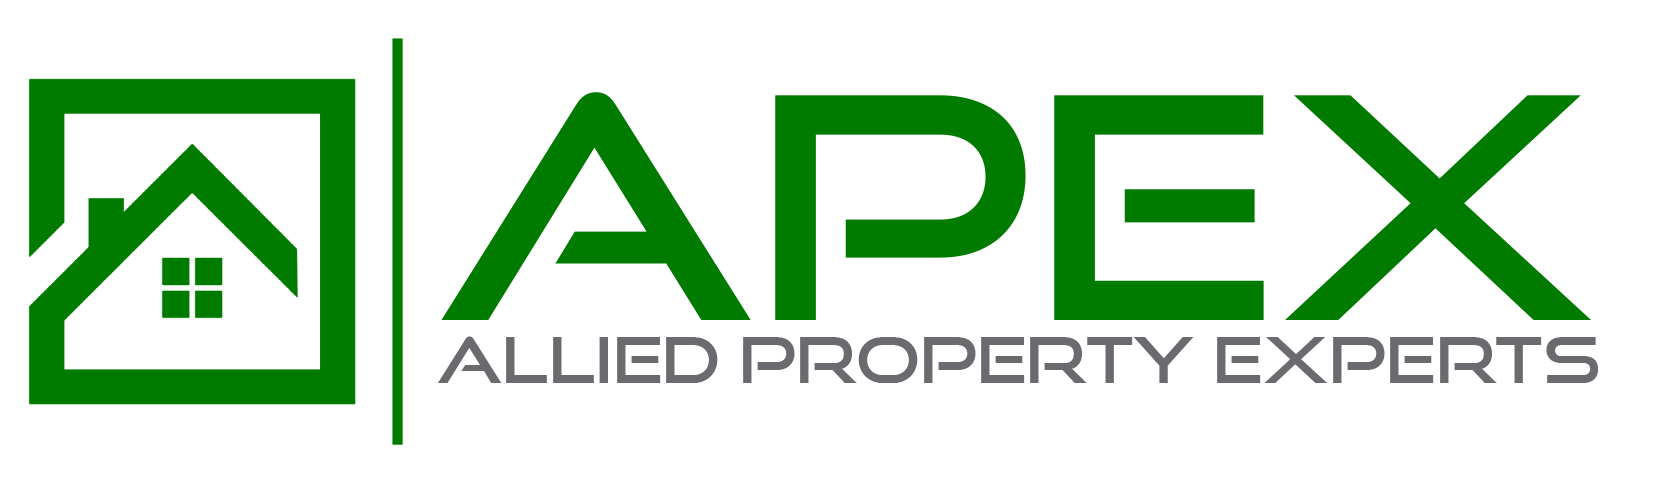 Apex-Allied Property Experts Logo